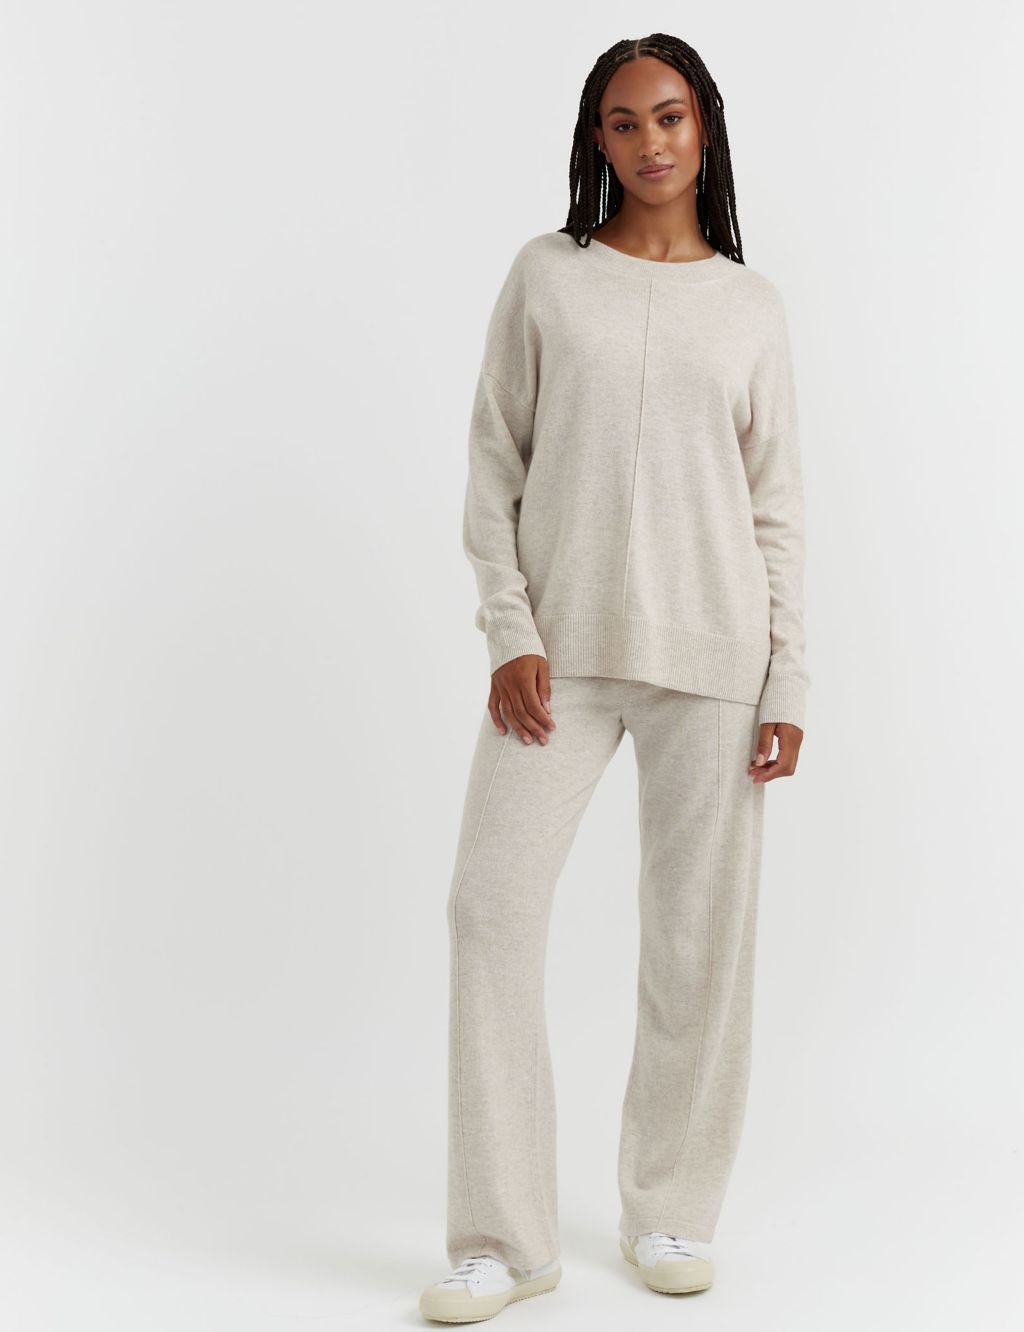 Wool Rich with Cashmere Relaxed Jumper image 1